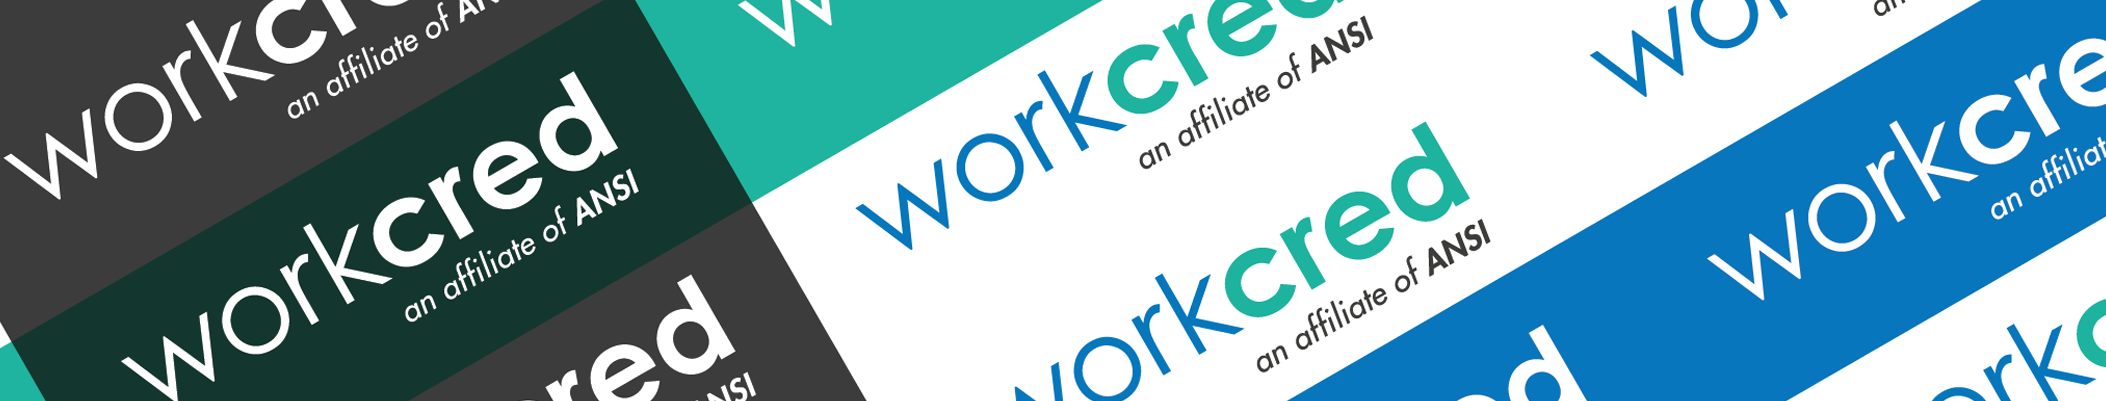 Workcred Goes on Air: Building a Quality Workforce with Quality Credentialing